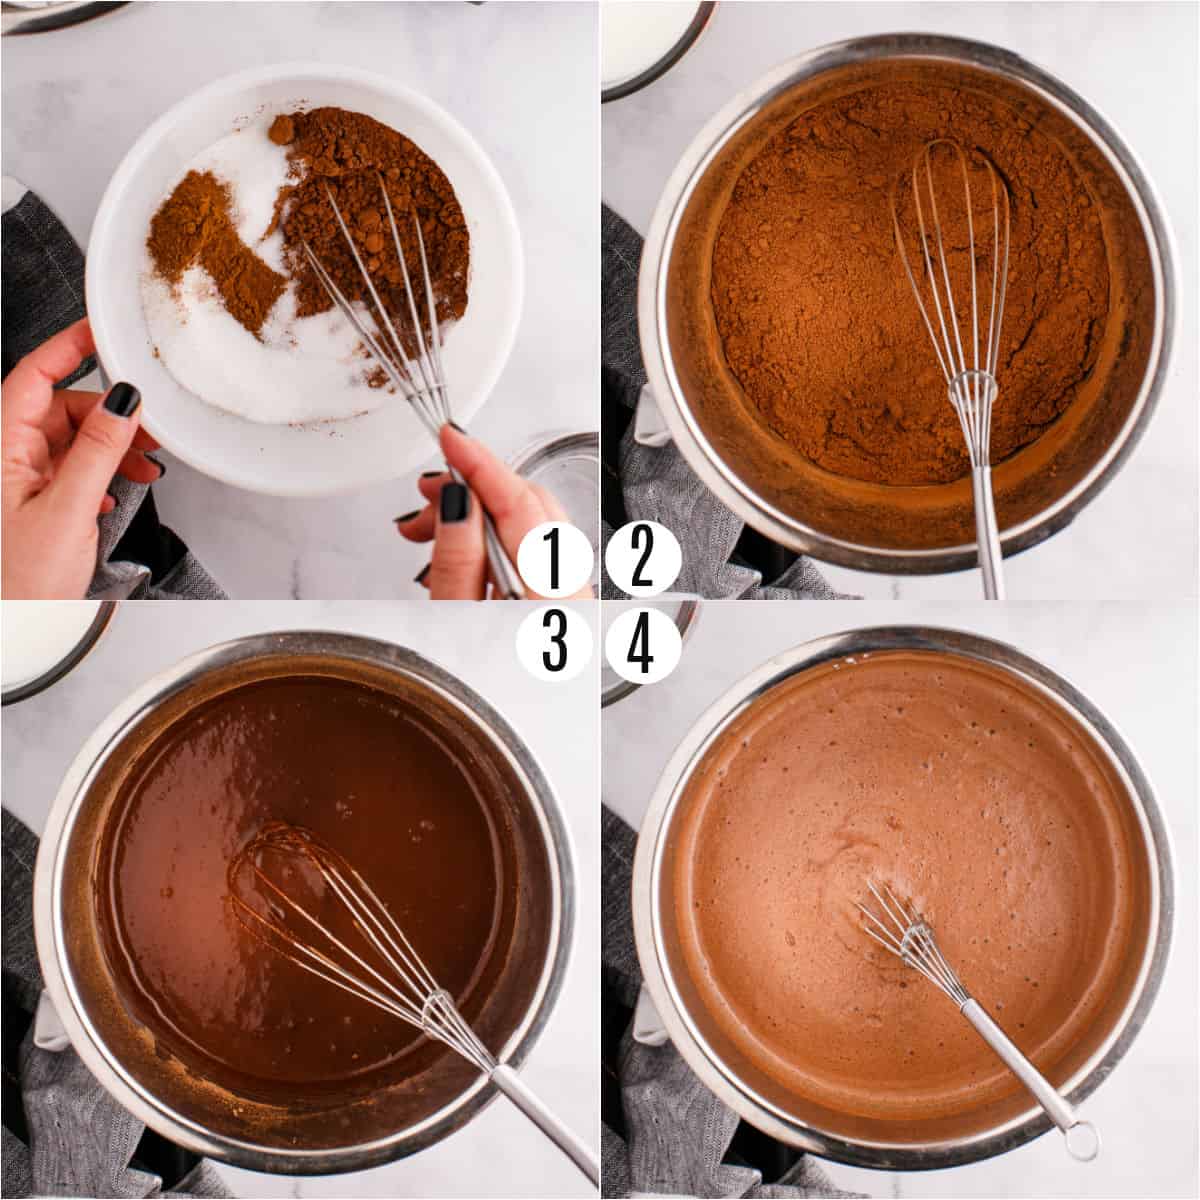 Step by step photos showing how to make hot cocoa in the Instant Pot.